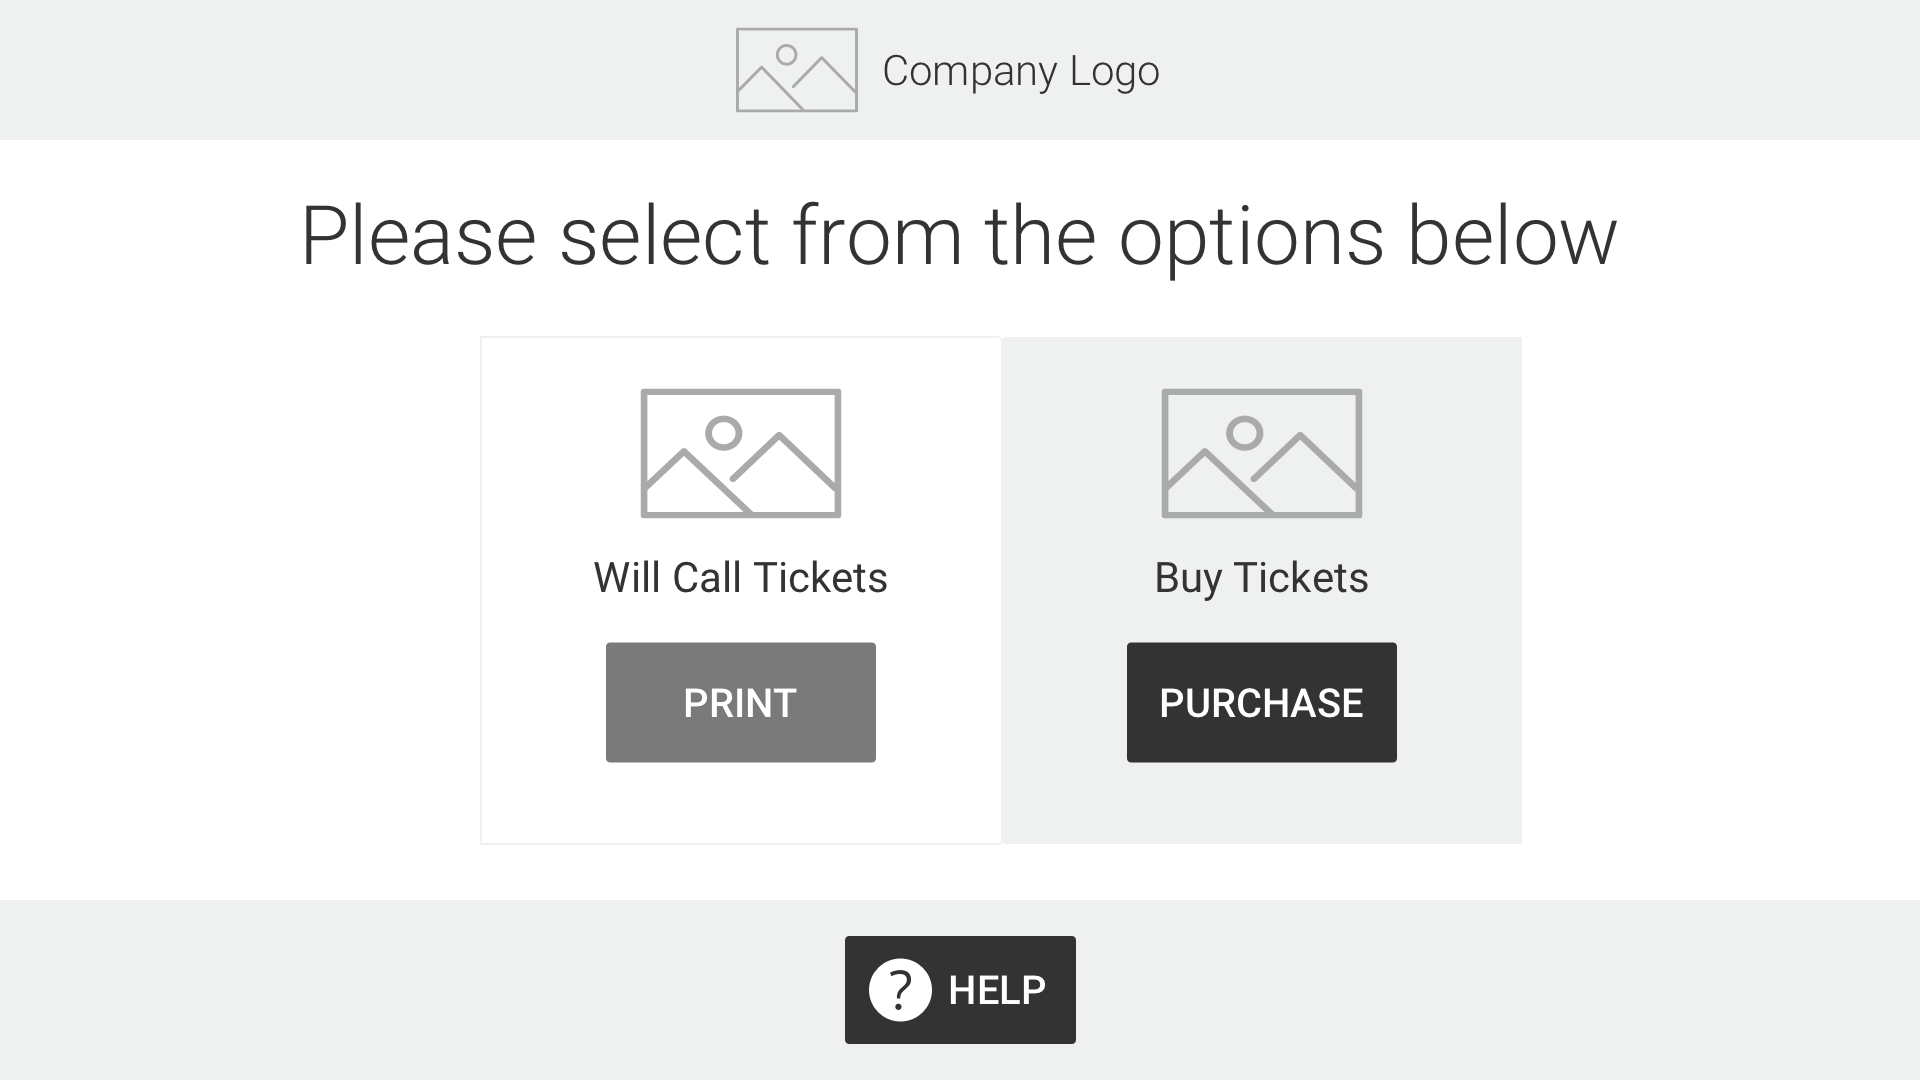 Options list for will call and purchasing tickets